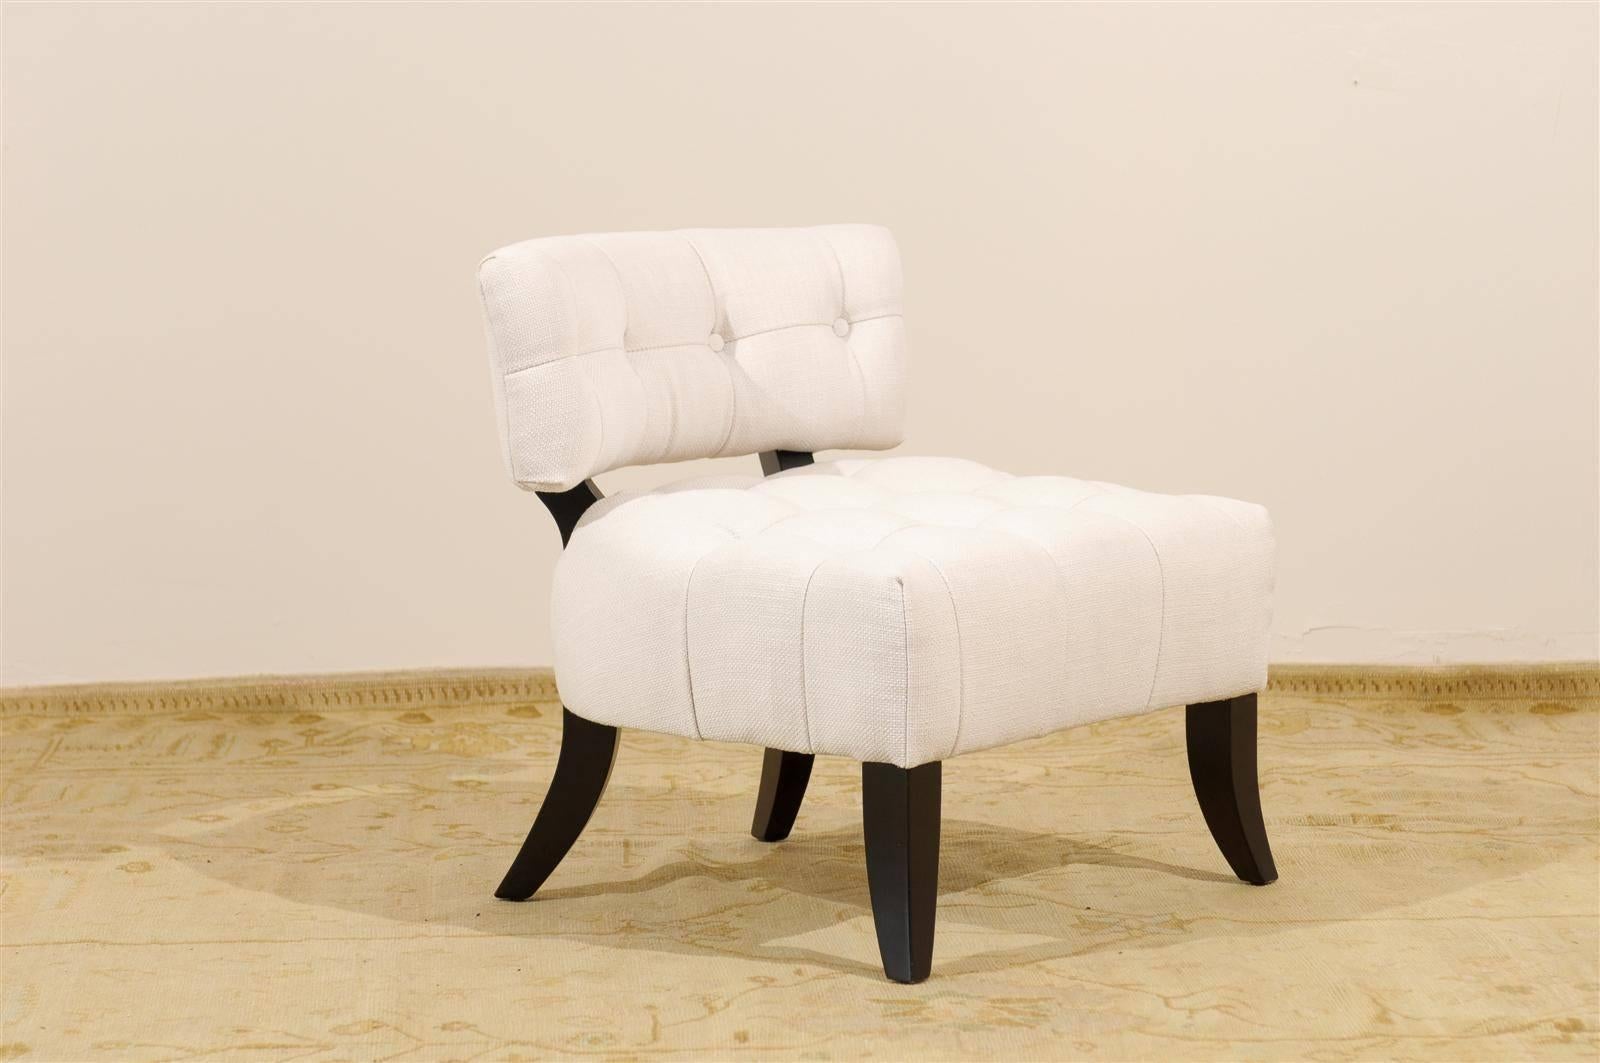 These magnificent lounge chairs are shipped as professionally photographed and described in the listing narrative: Meticulously professionally restored and installation ready. Expert custom upholstery service is available.

A fabulous pair of